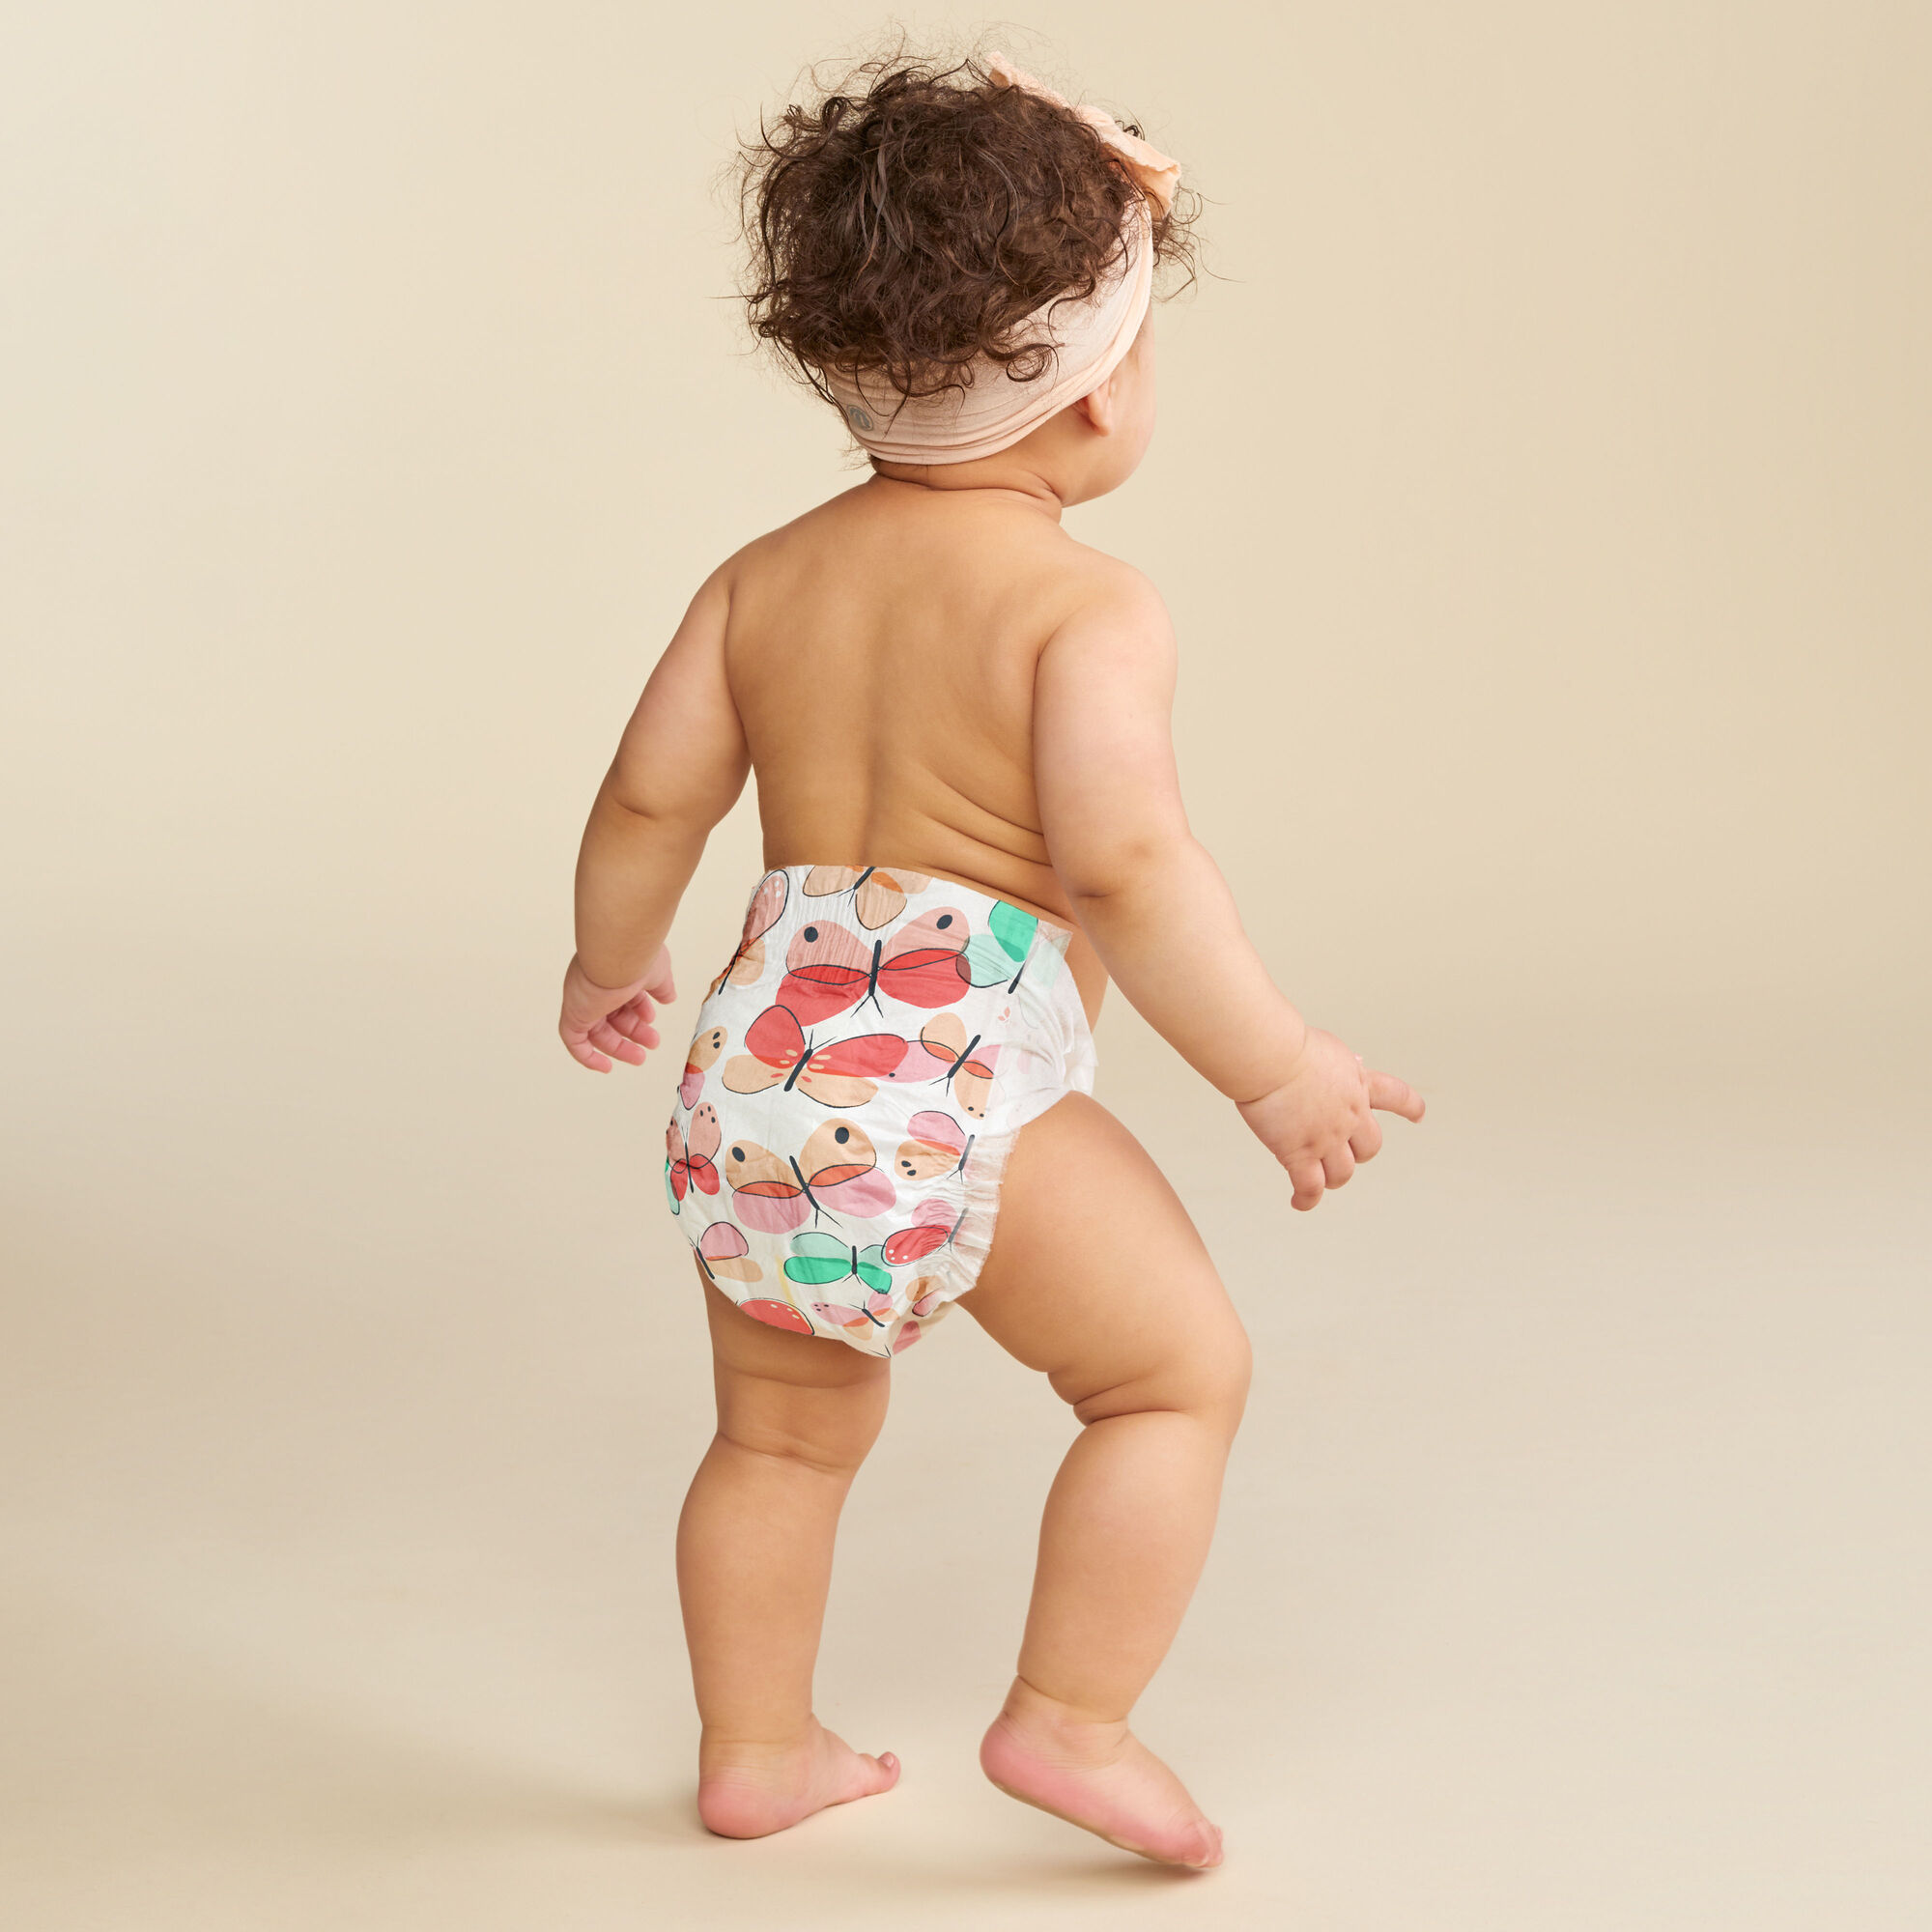 Love That Max : How to get diapers for kids with disabilities at